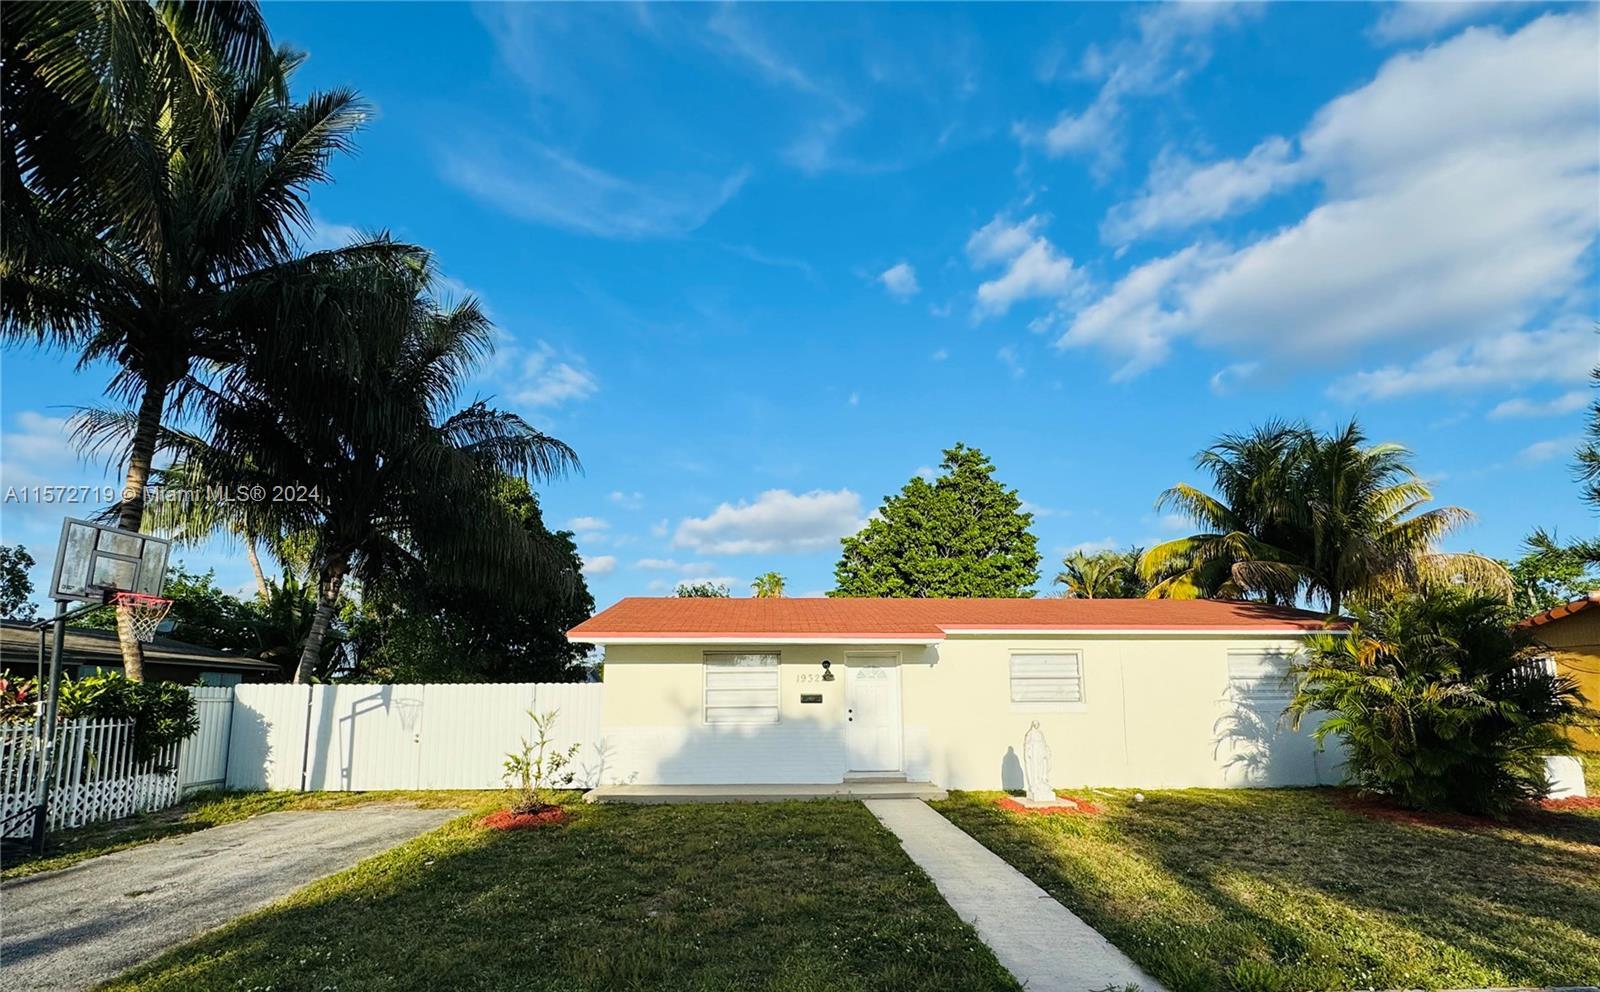 Photo of 19323 NW 42nd Ct in Miami Gardens, FL